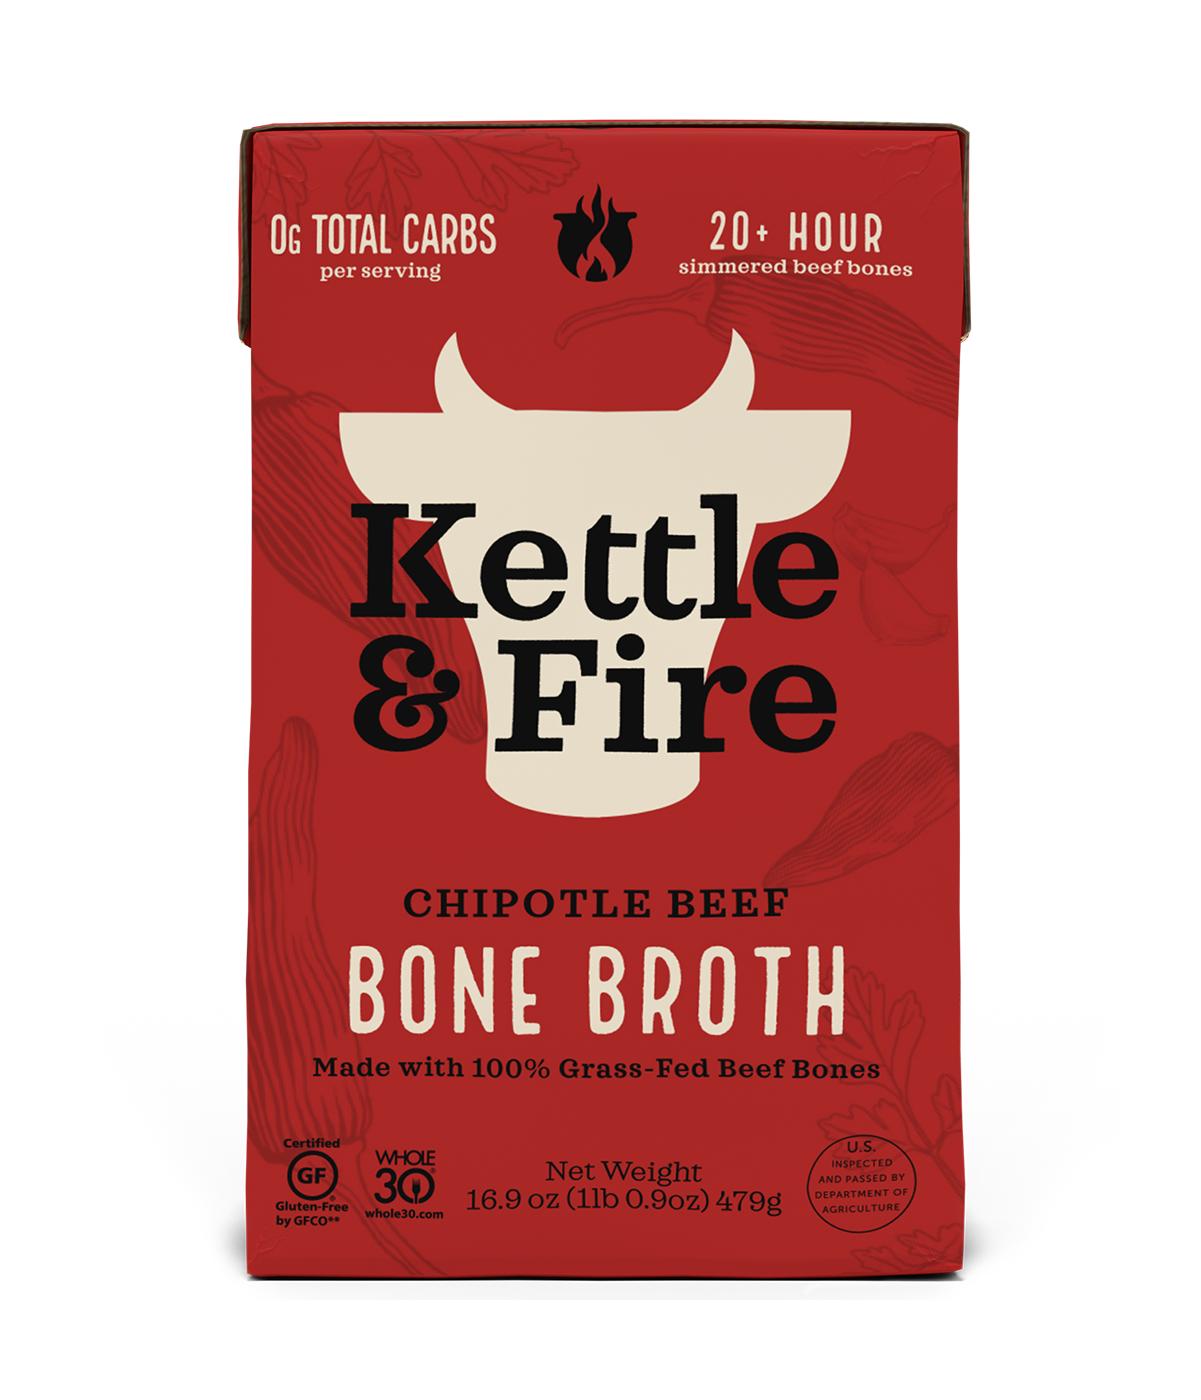 Kettle & Fire Chipotle Beef Bone Broth; image 1 of 2